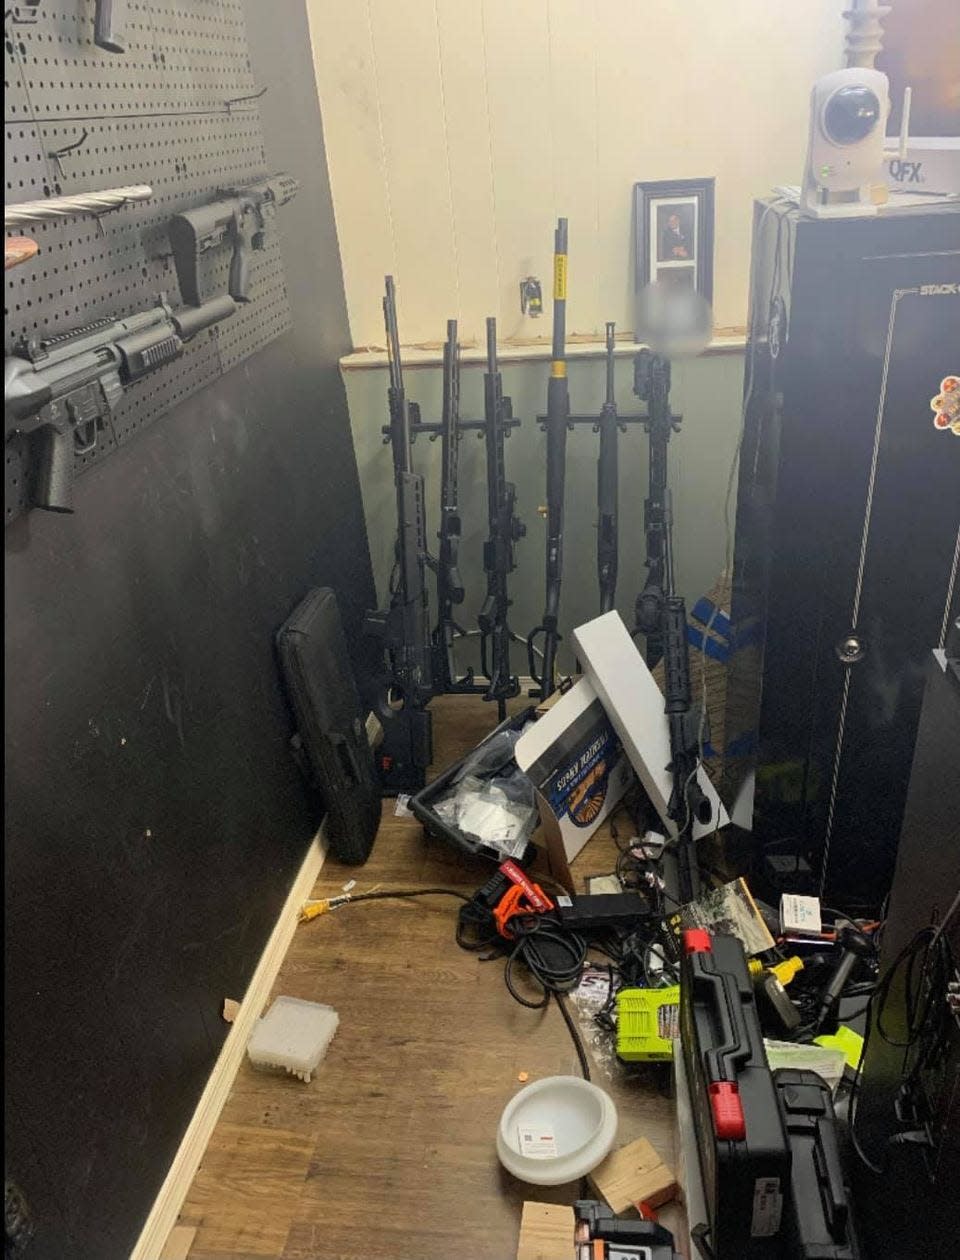 Guns and weapons seized